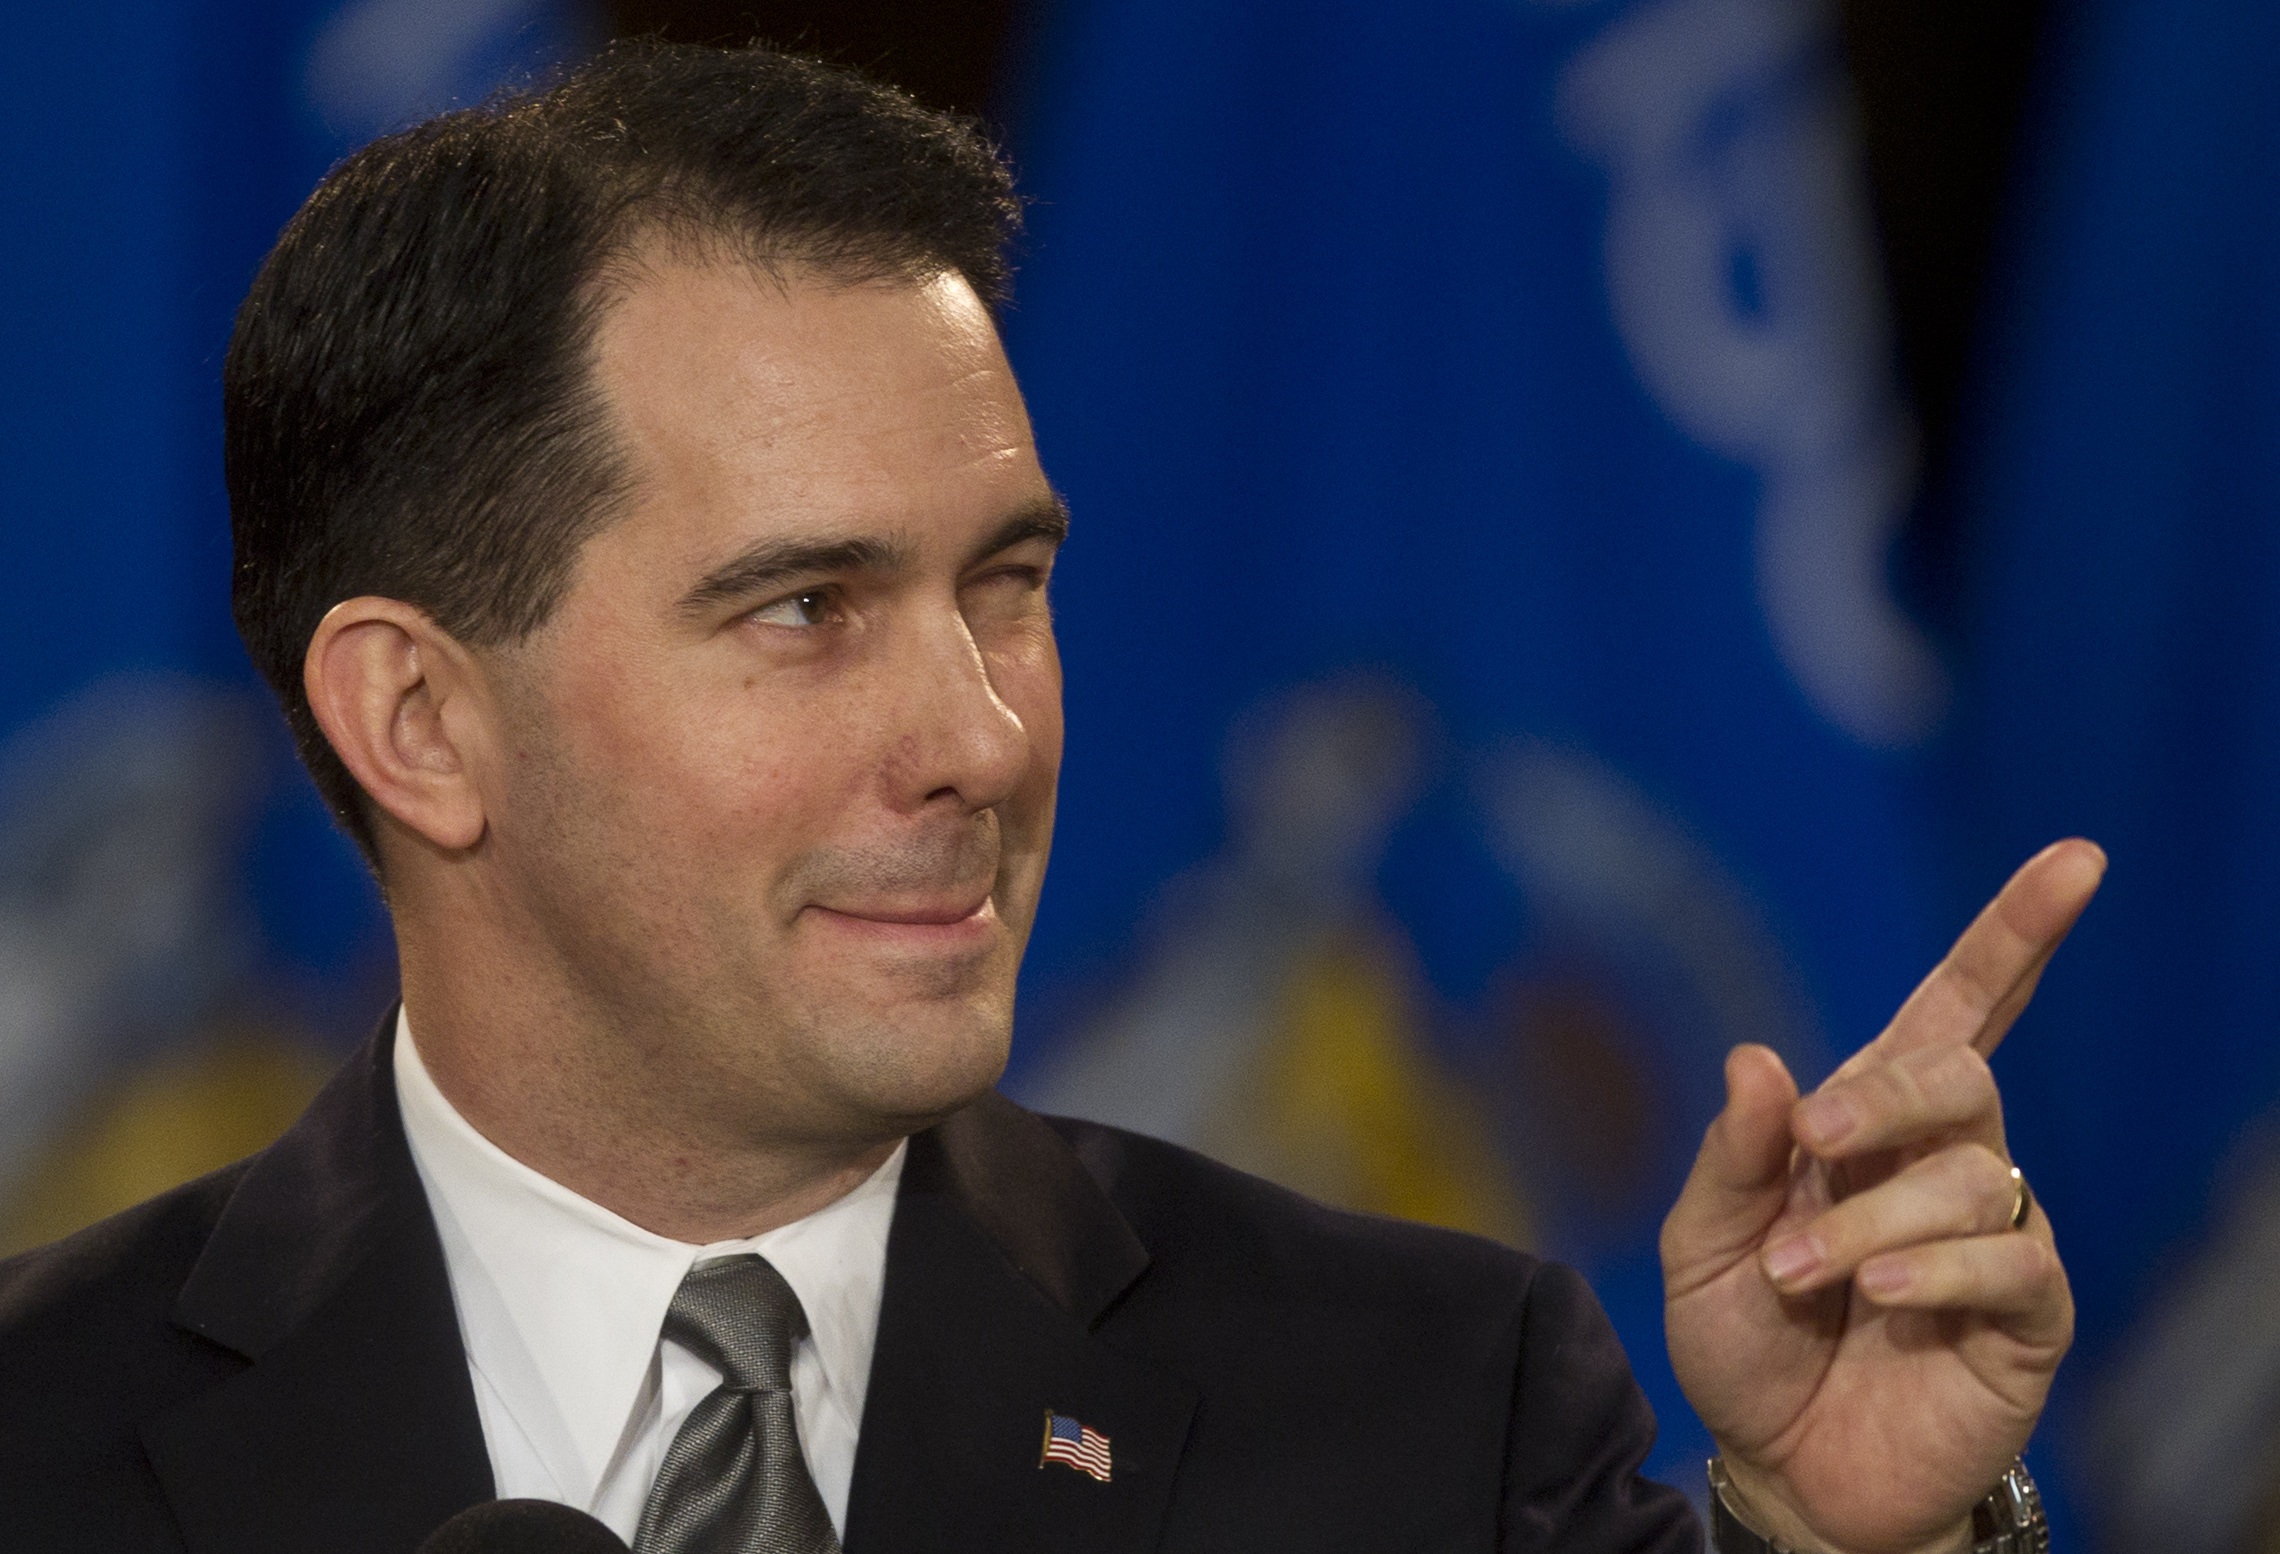 Scott Walker speaks at an inauguration ceremony at the state capitol in Madison, Wisconsin.